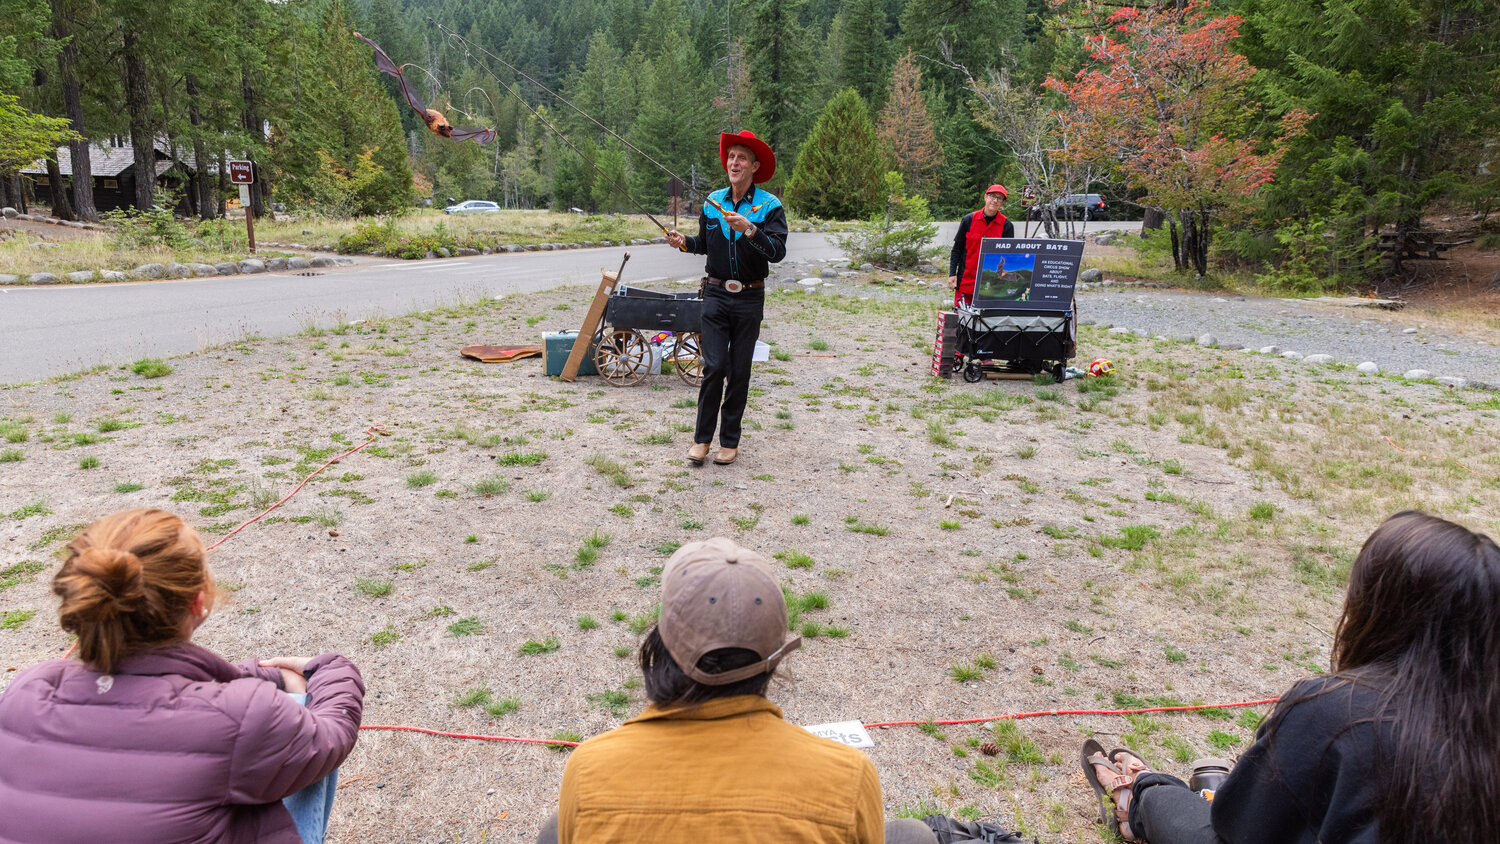 David Lichtenstein smiles while holding a faux bat on fishing wire during a Vaudeville-esque show about the flying mammals at Mount Rainier National Park on Tuesday, Sept. 12.